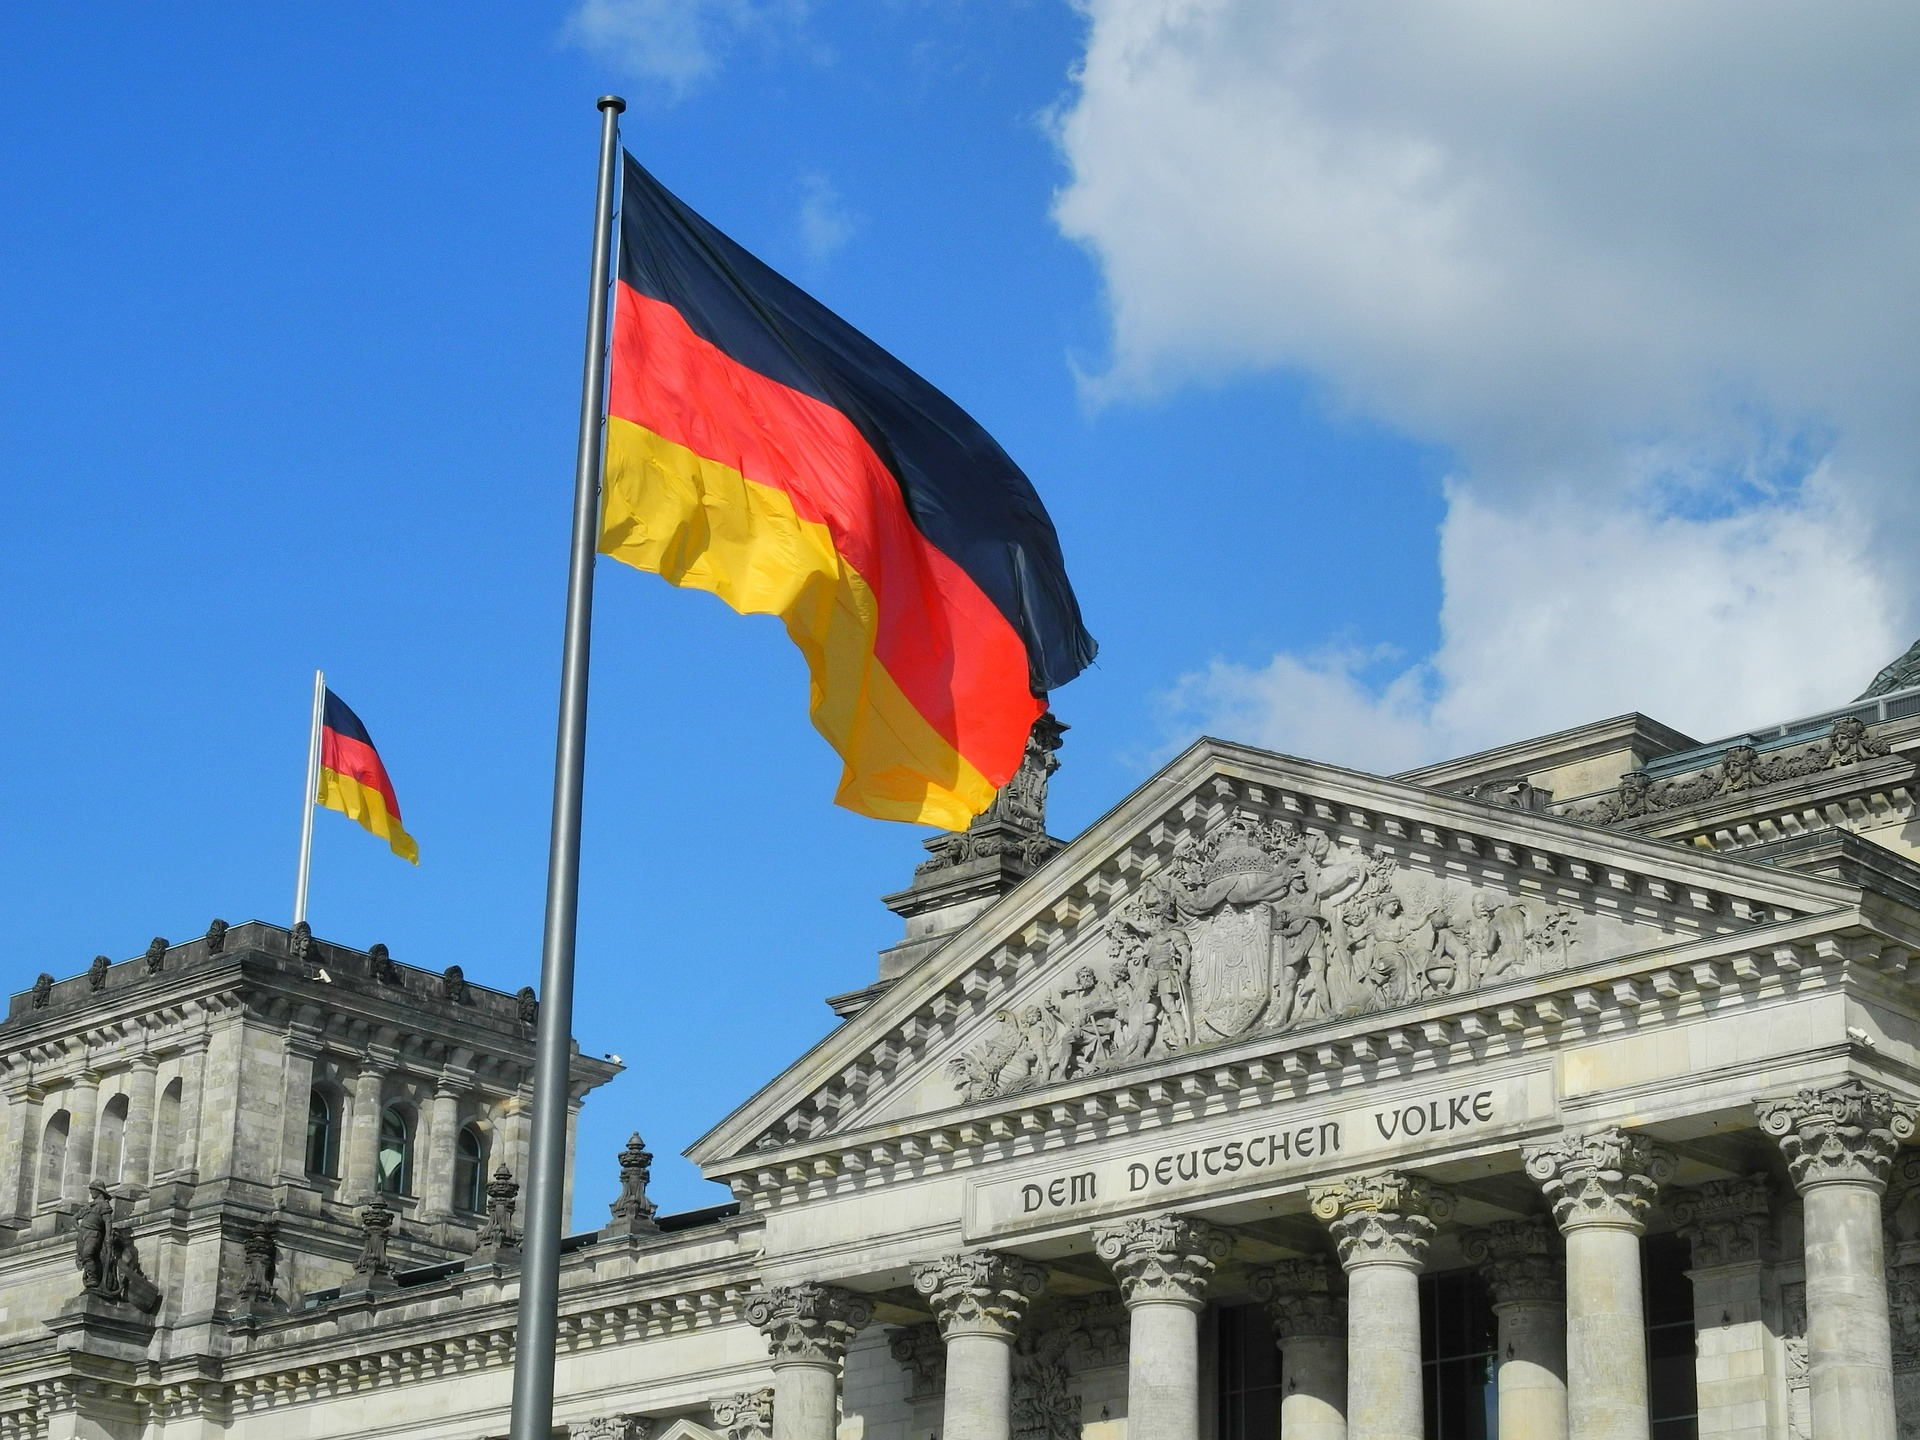 Labor immigration law approved in Germany